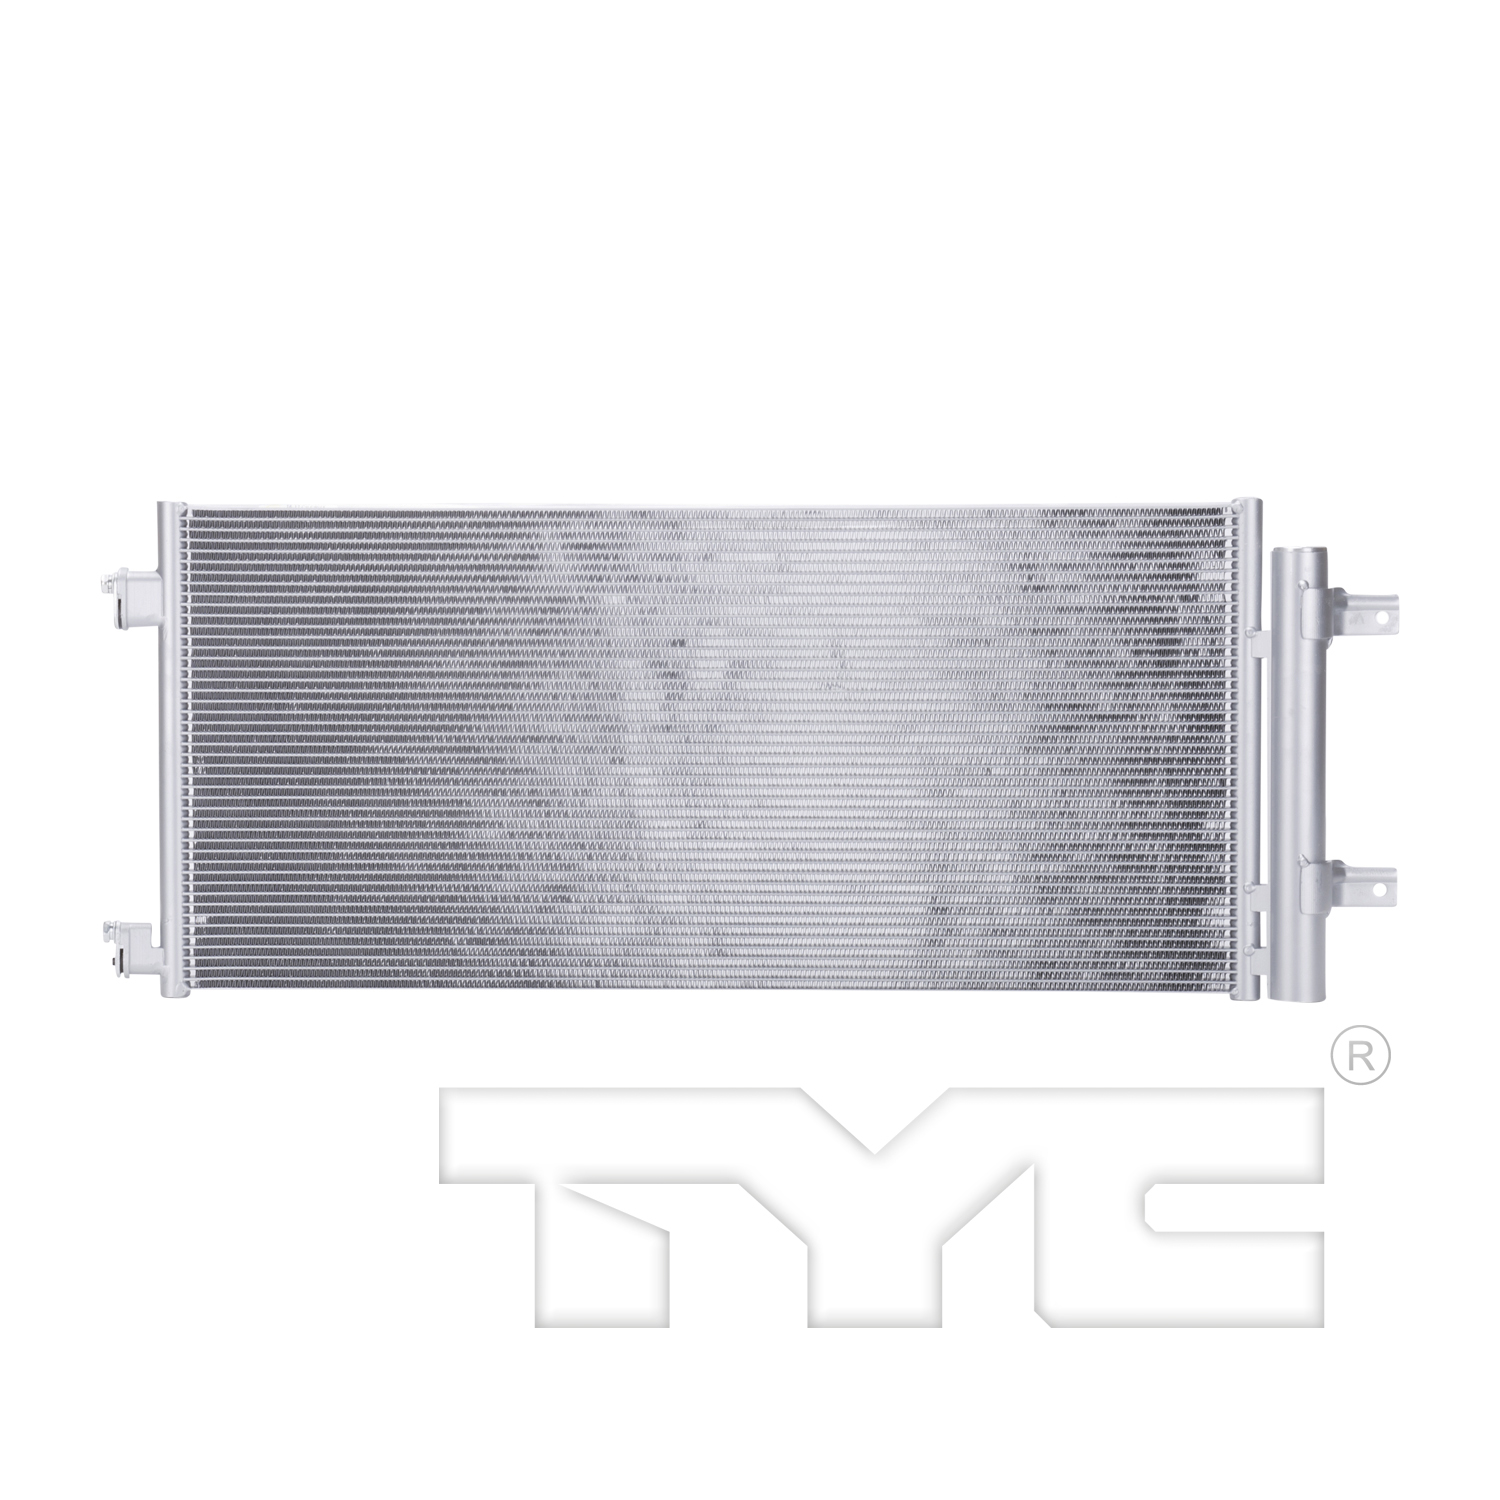 Aftermarket AC CONDENSERS for CHEVROLET - CRUZE, CRUZE,17-18,Air conditioning condenser